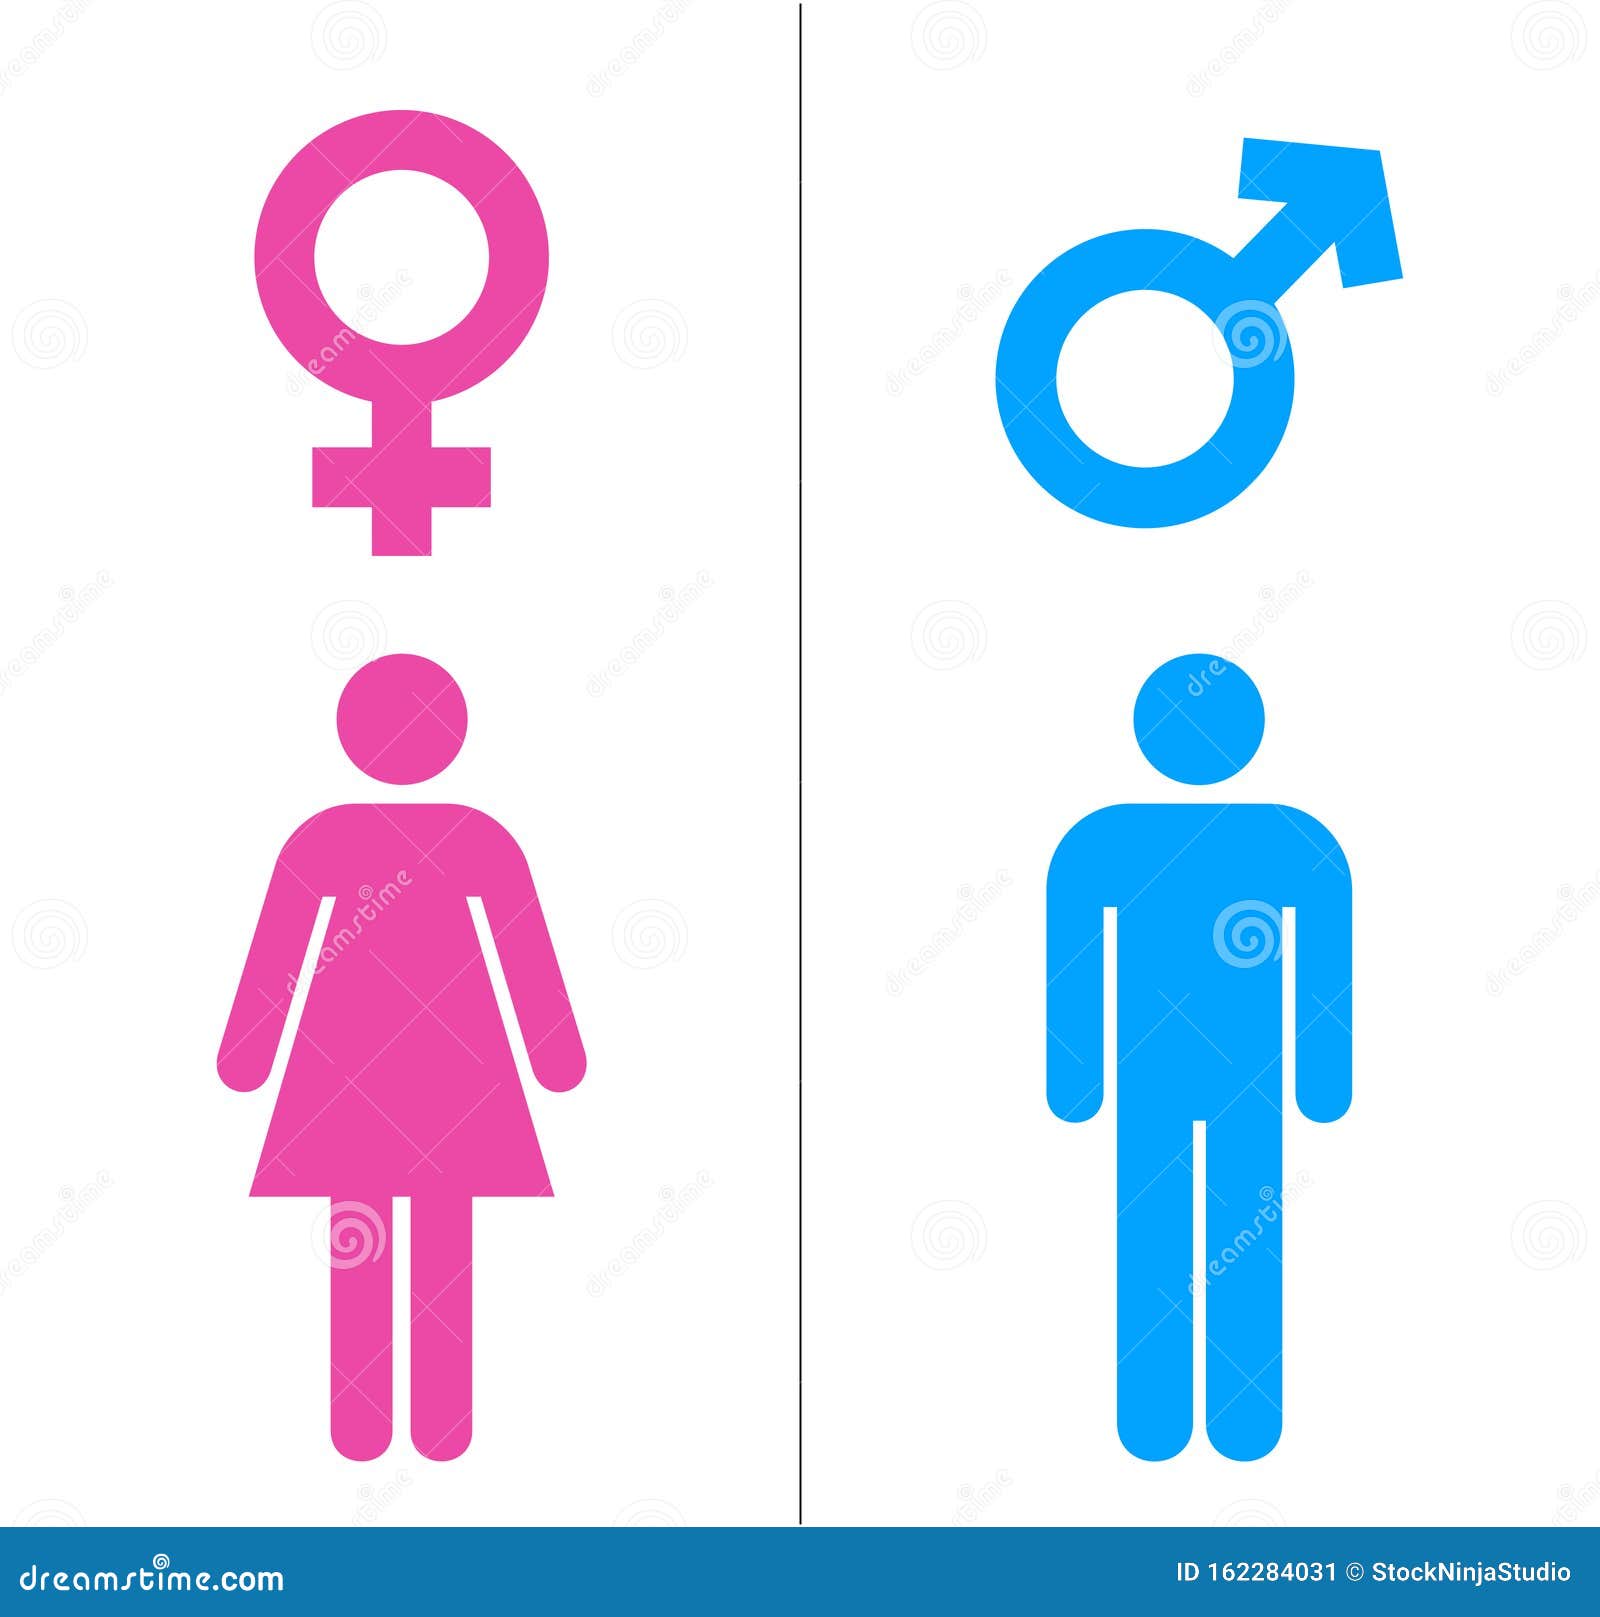 Male And Female Icons With Blue And Pink Color Gender Symbol Vector